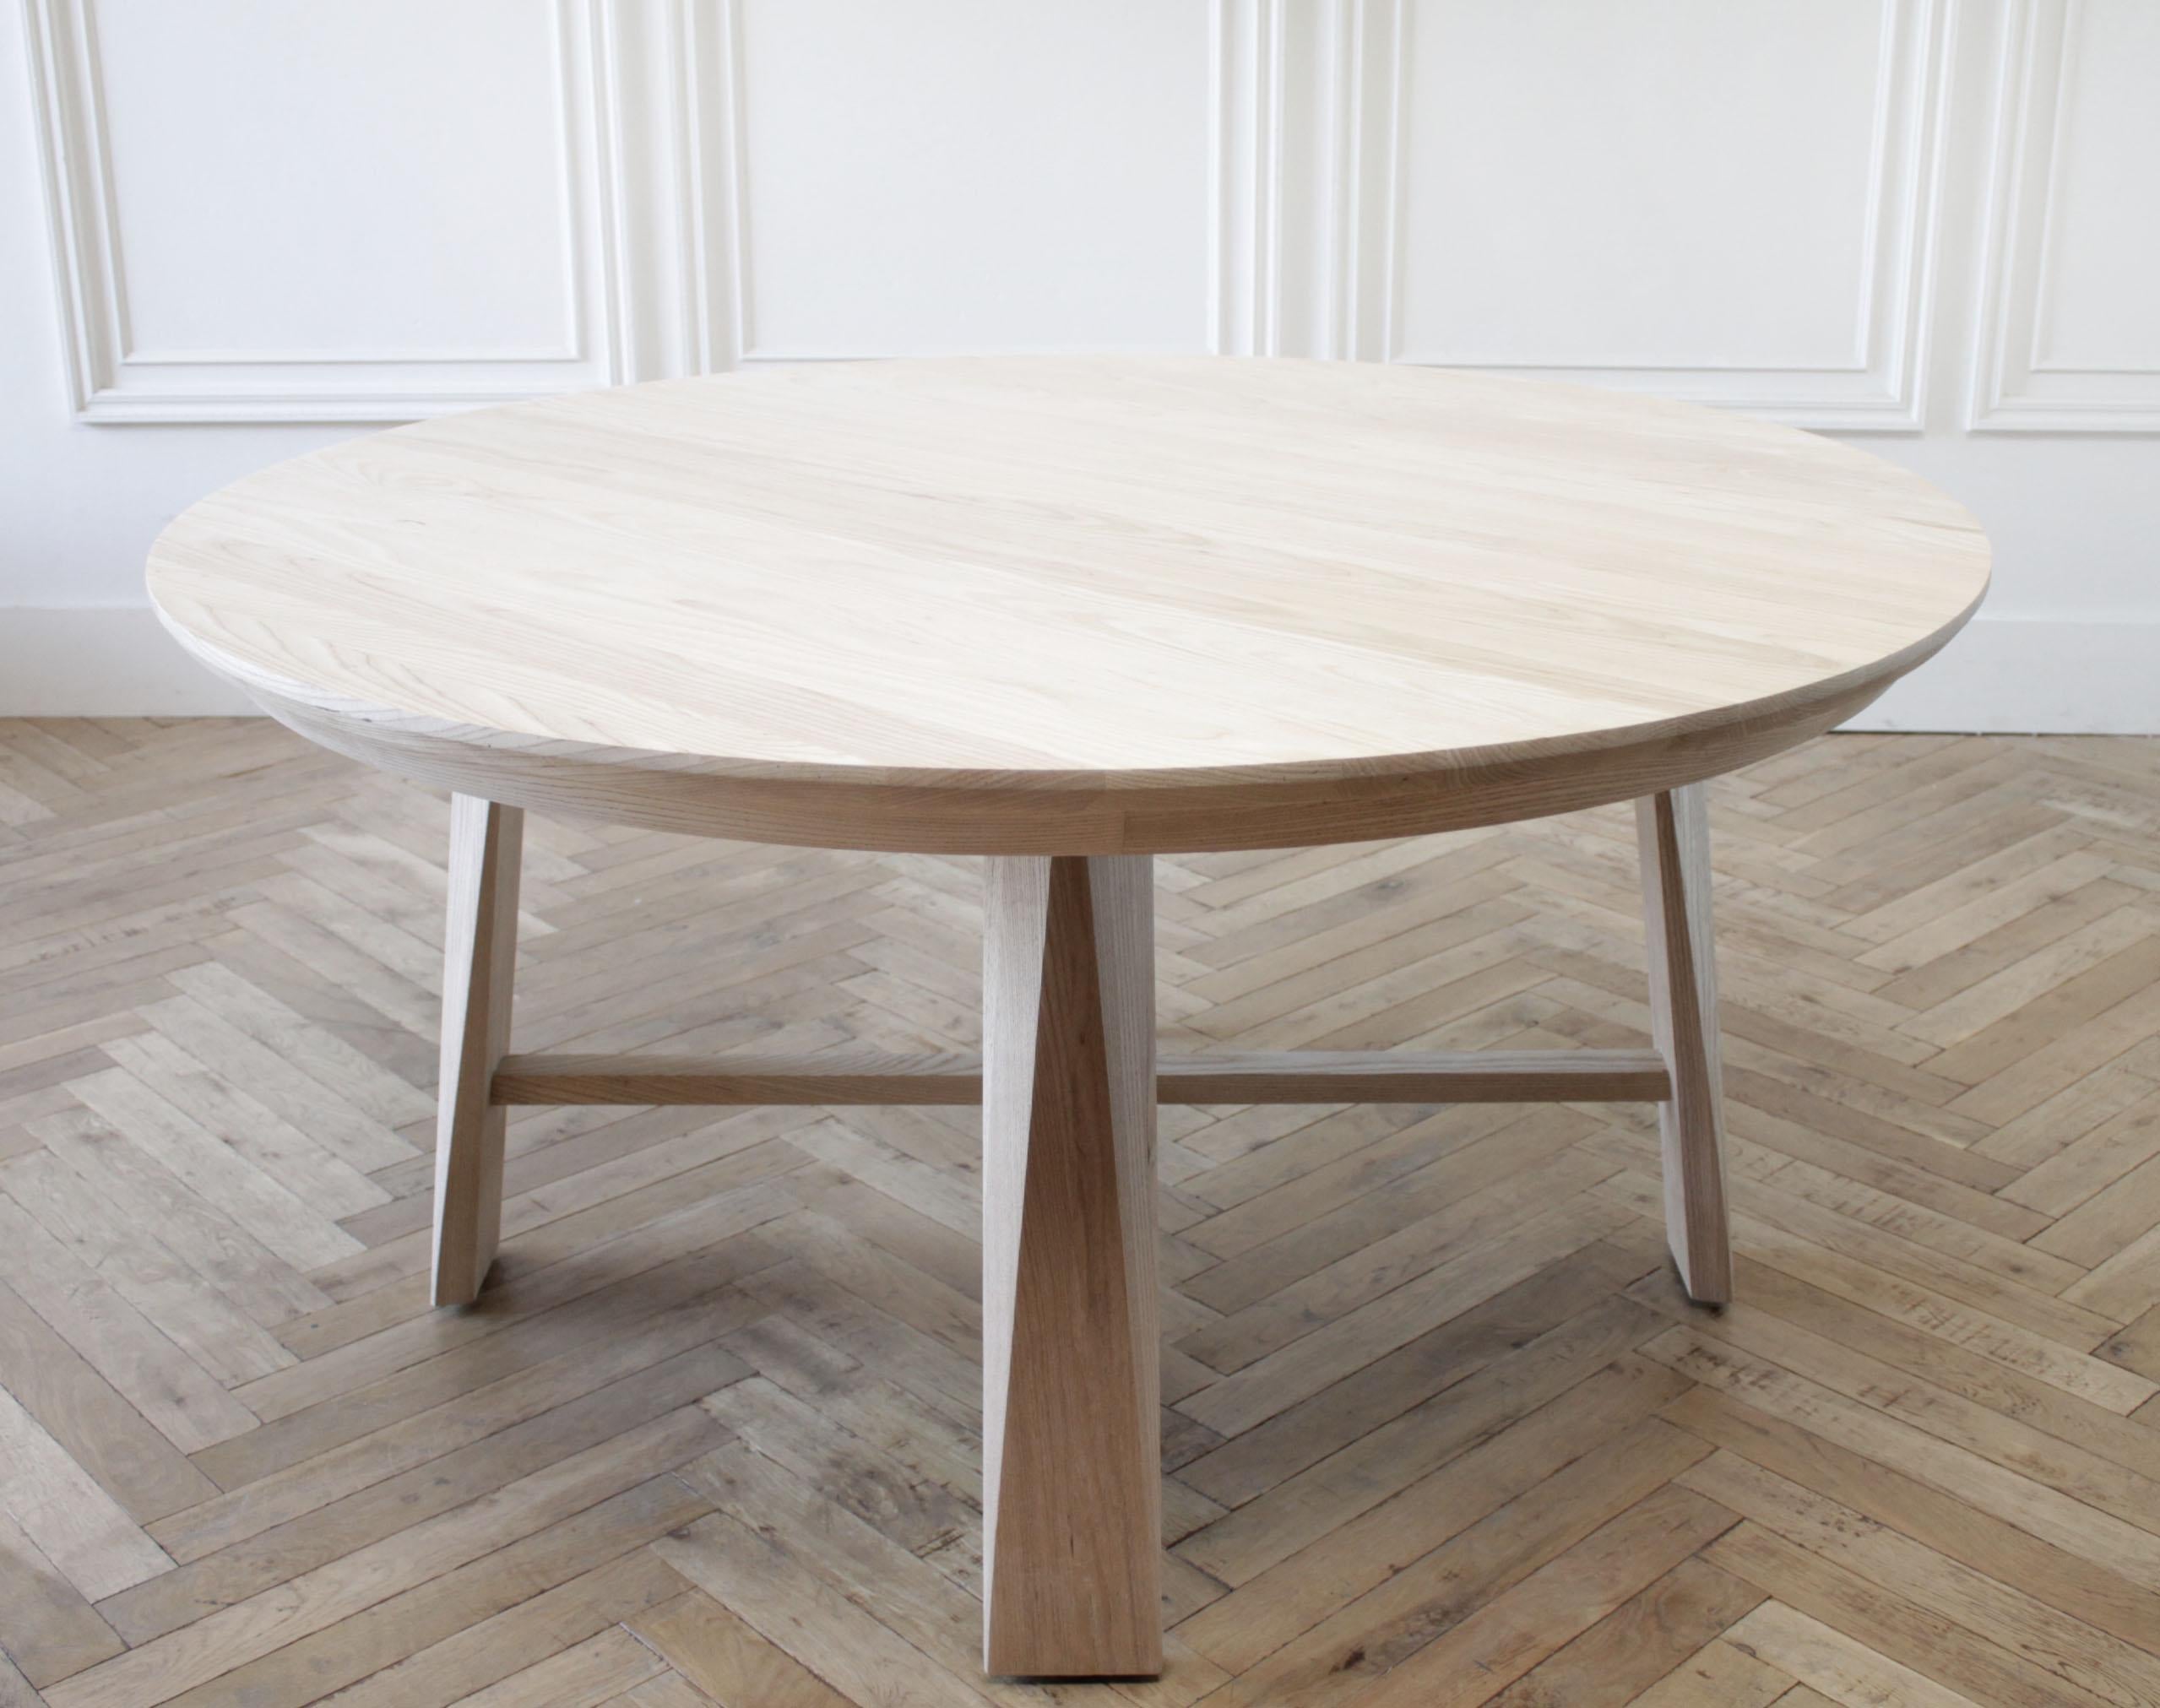 Custom solid white oak round dining table
Available for custom ordering, in any size, shown in waxed white oak.
We also offer a natural white oak, medium white oak, and onyx stain. Beautiful angular cut legs with stretcher. Tabletop can be removed